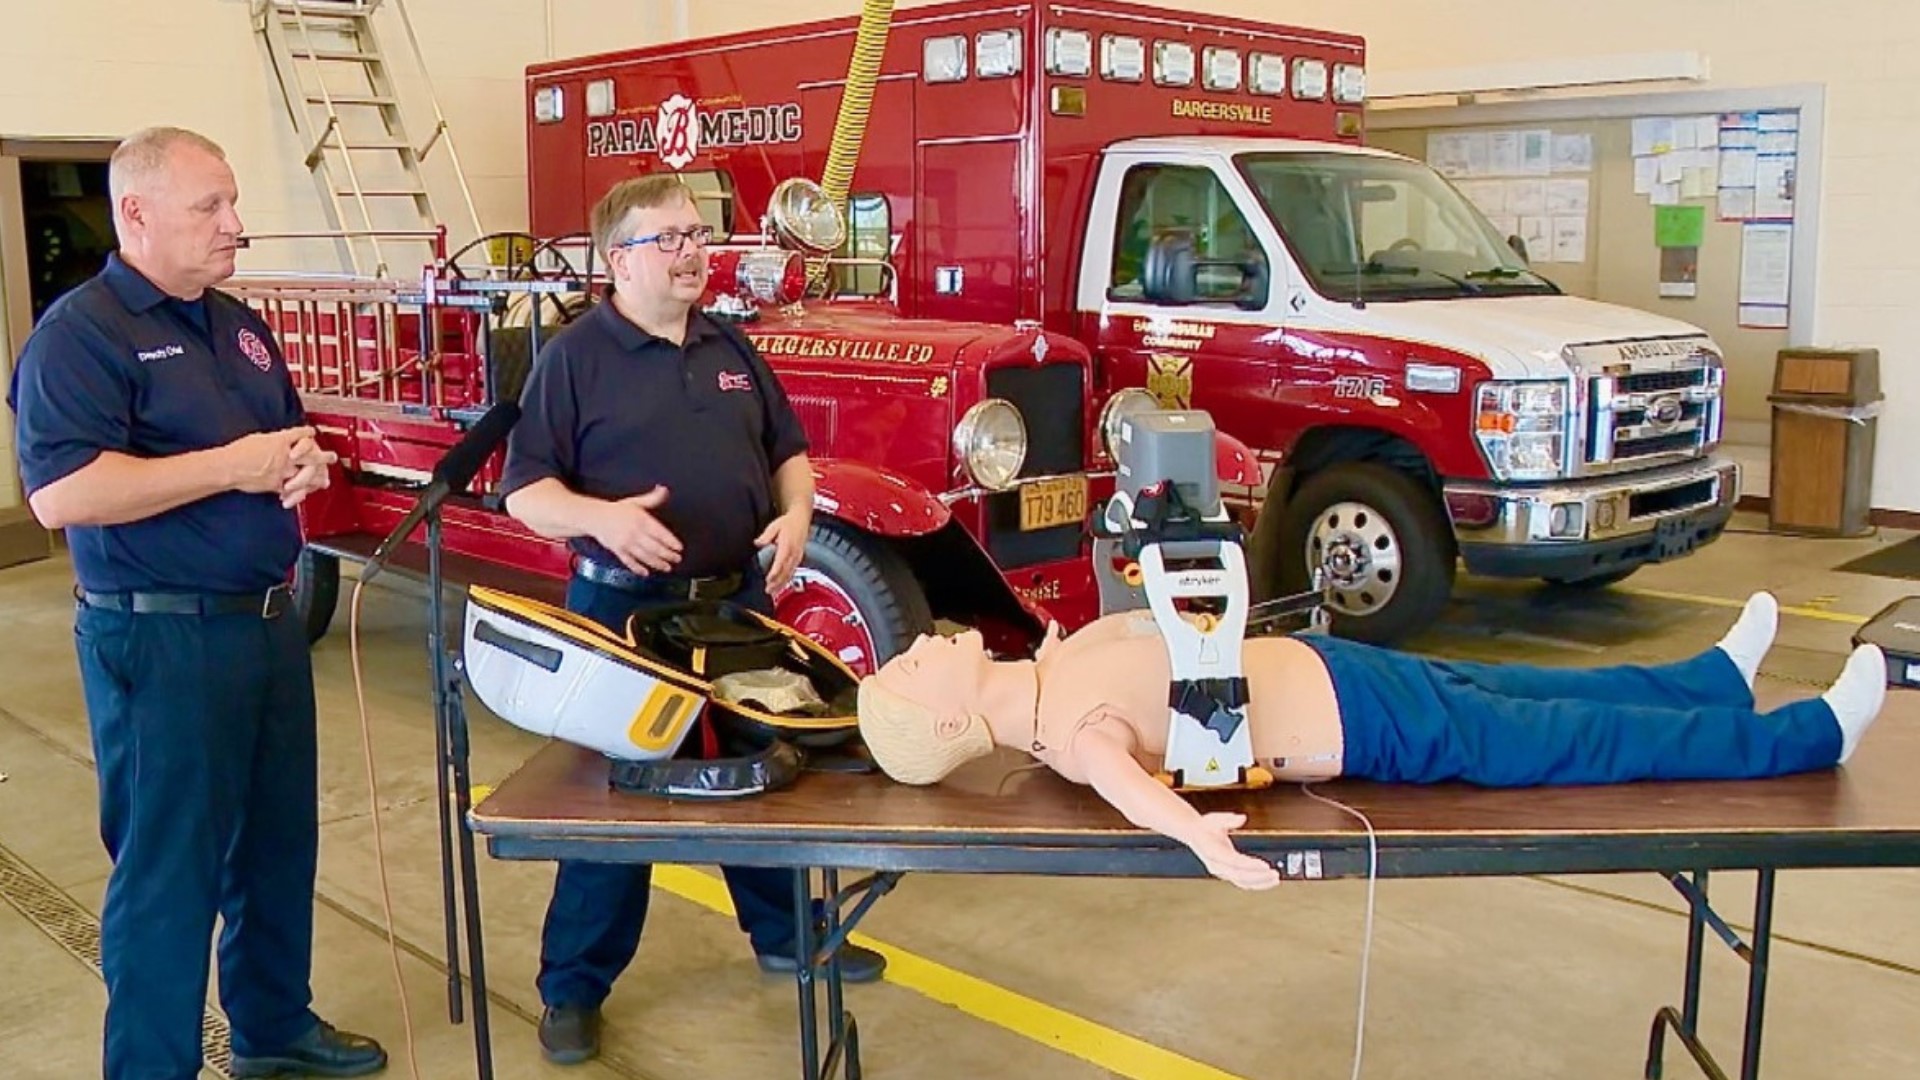 The LUCAS CPR device is a mechanical chest compression system that has been around for years. But now, it has an extra sense of value because of the COVID-19 crisis.